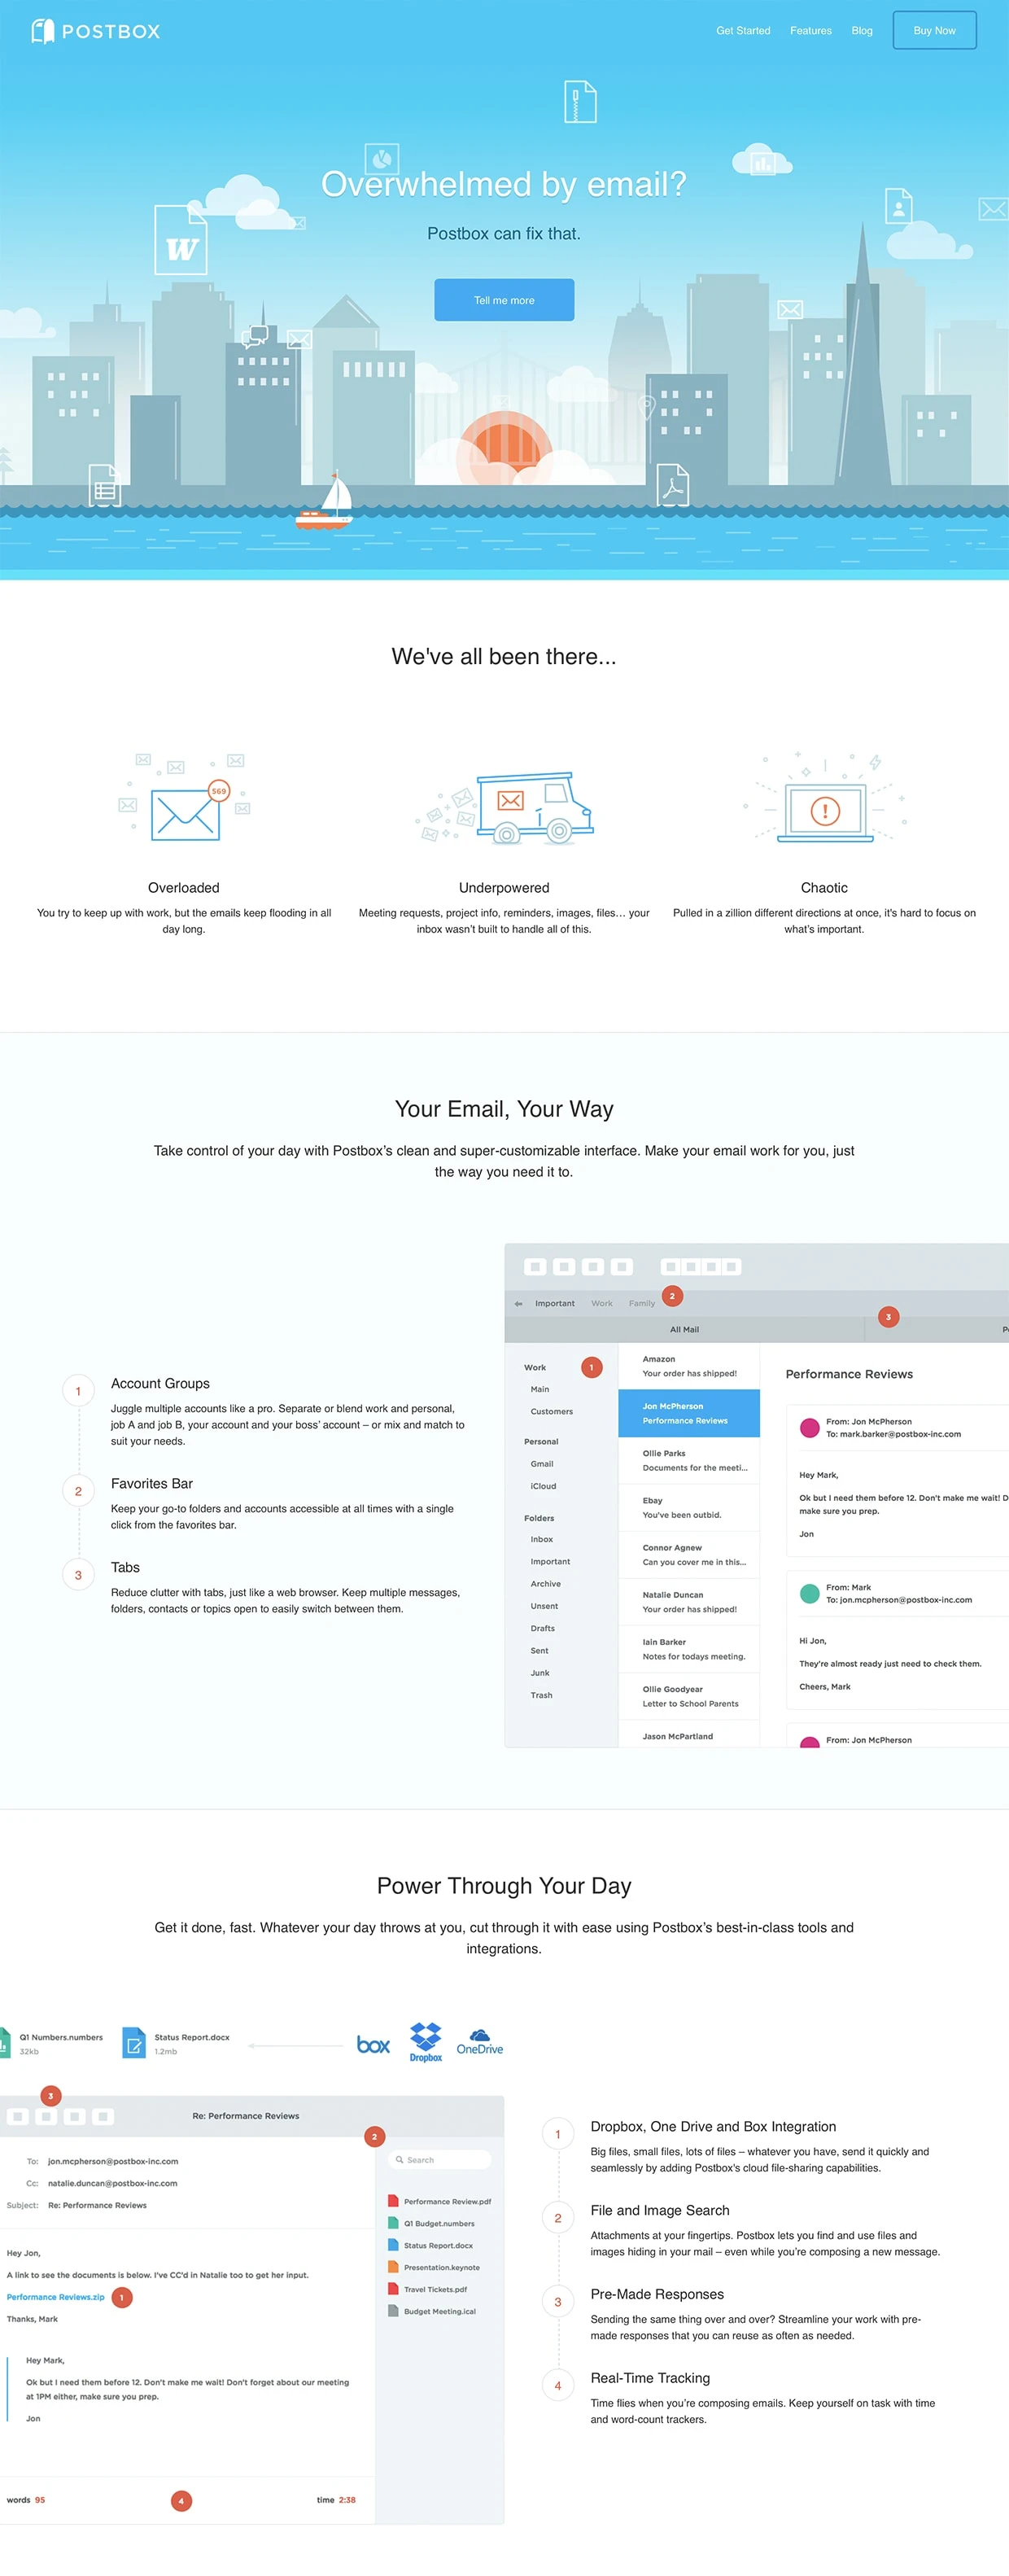 Postbox Landing Page Example: Take control of your day with Postbox’s super-customizable interface. Make your email work for you, just the way you need it to.